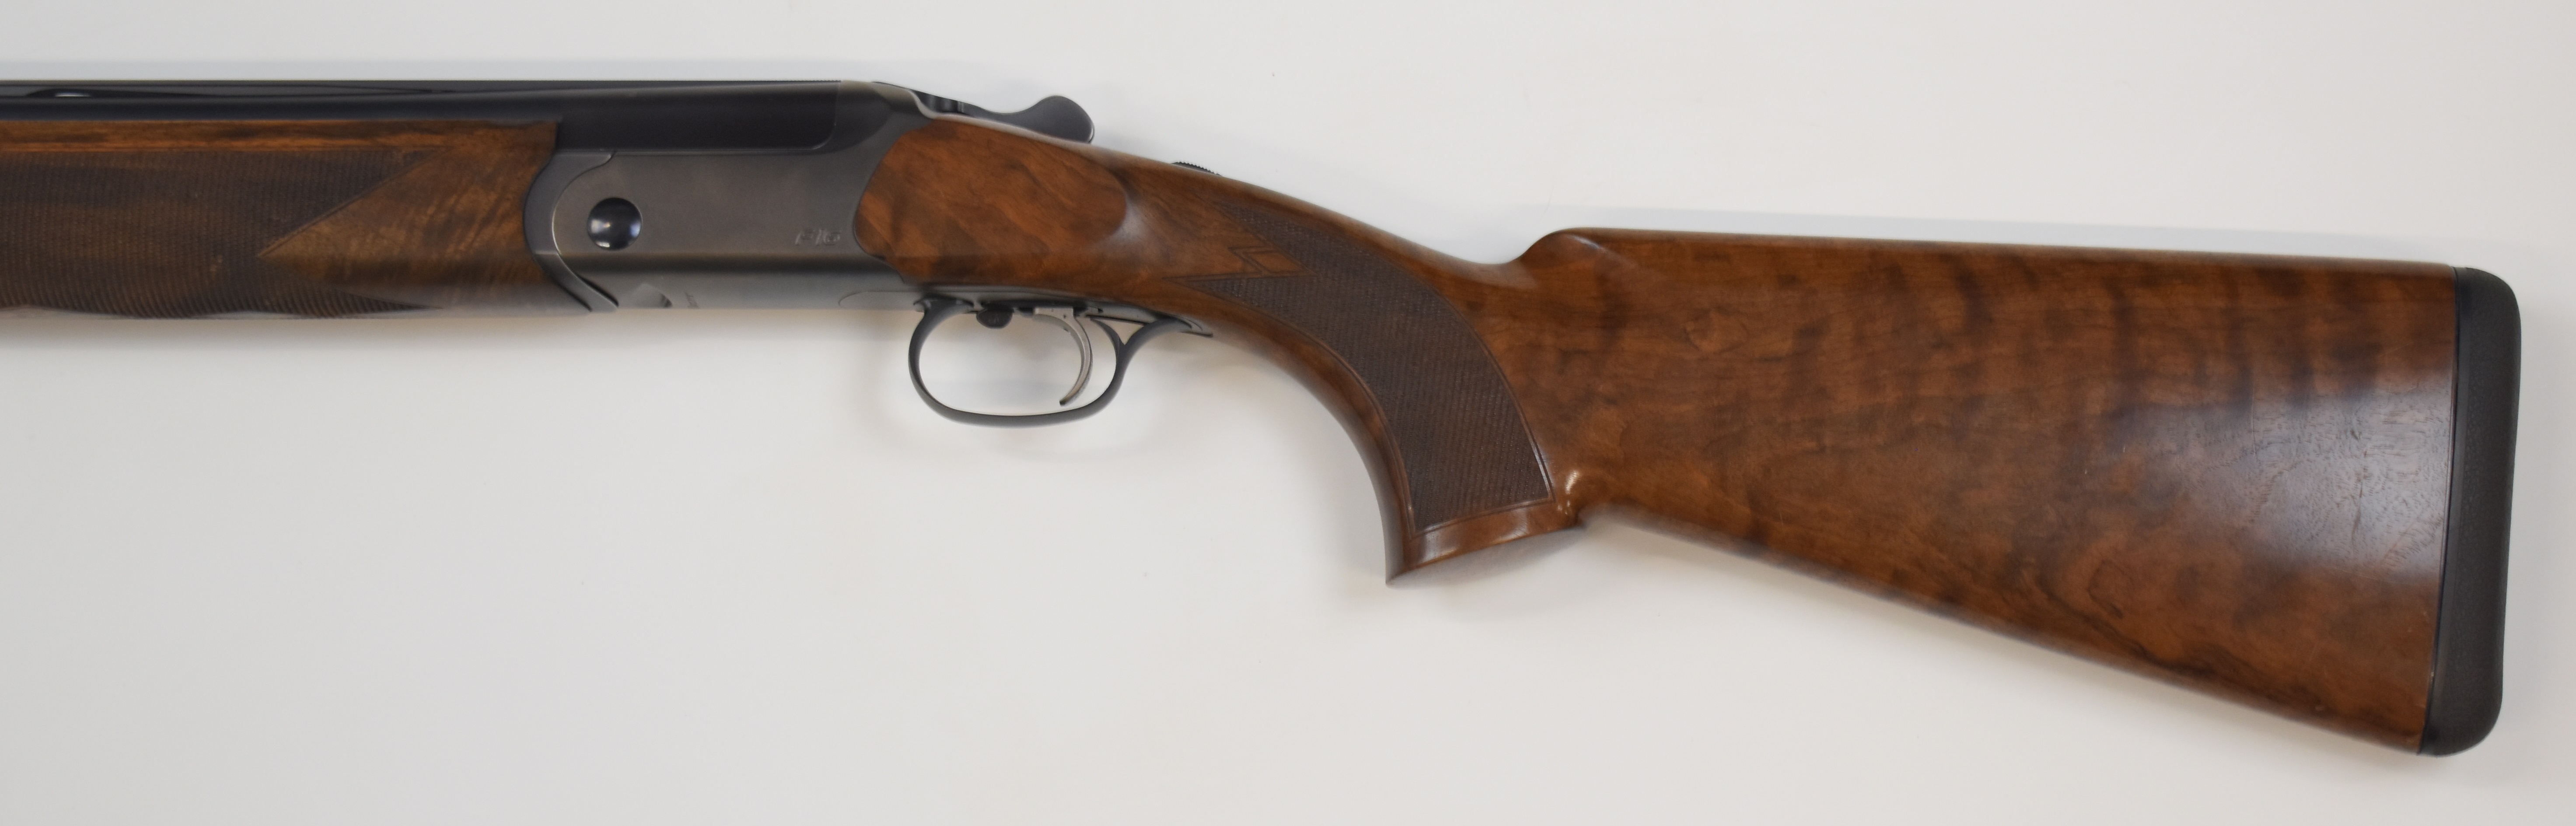 Blaser F16 12 bore over under ejector shotgun with named locks and underside, chequered semi- - Image 19 of 22